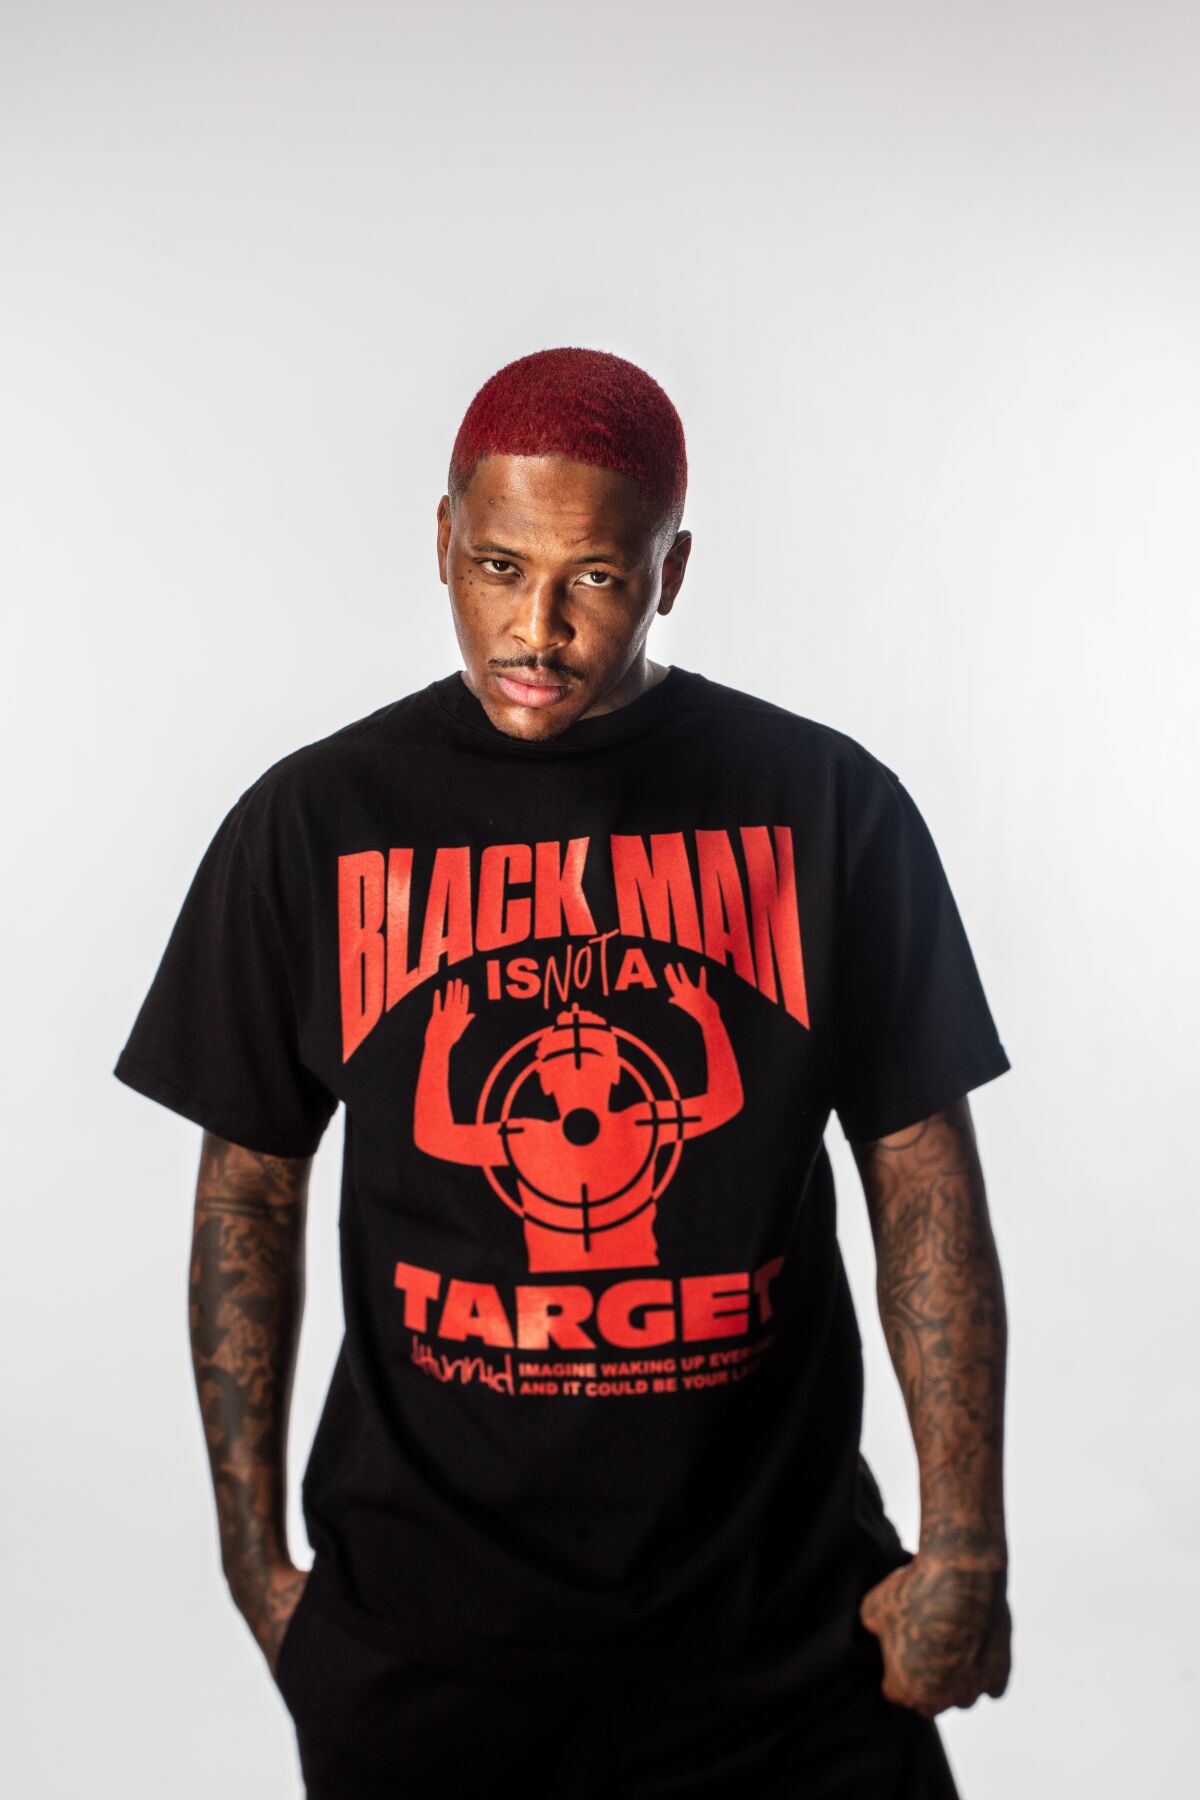  Rapper YG is photographed at his Chatsworth home Sept. 21, 2020, wearing a shirt  saying, "Black Man Is Not a Target."  